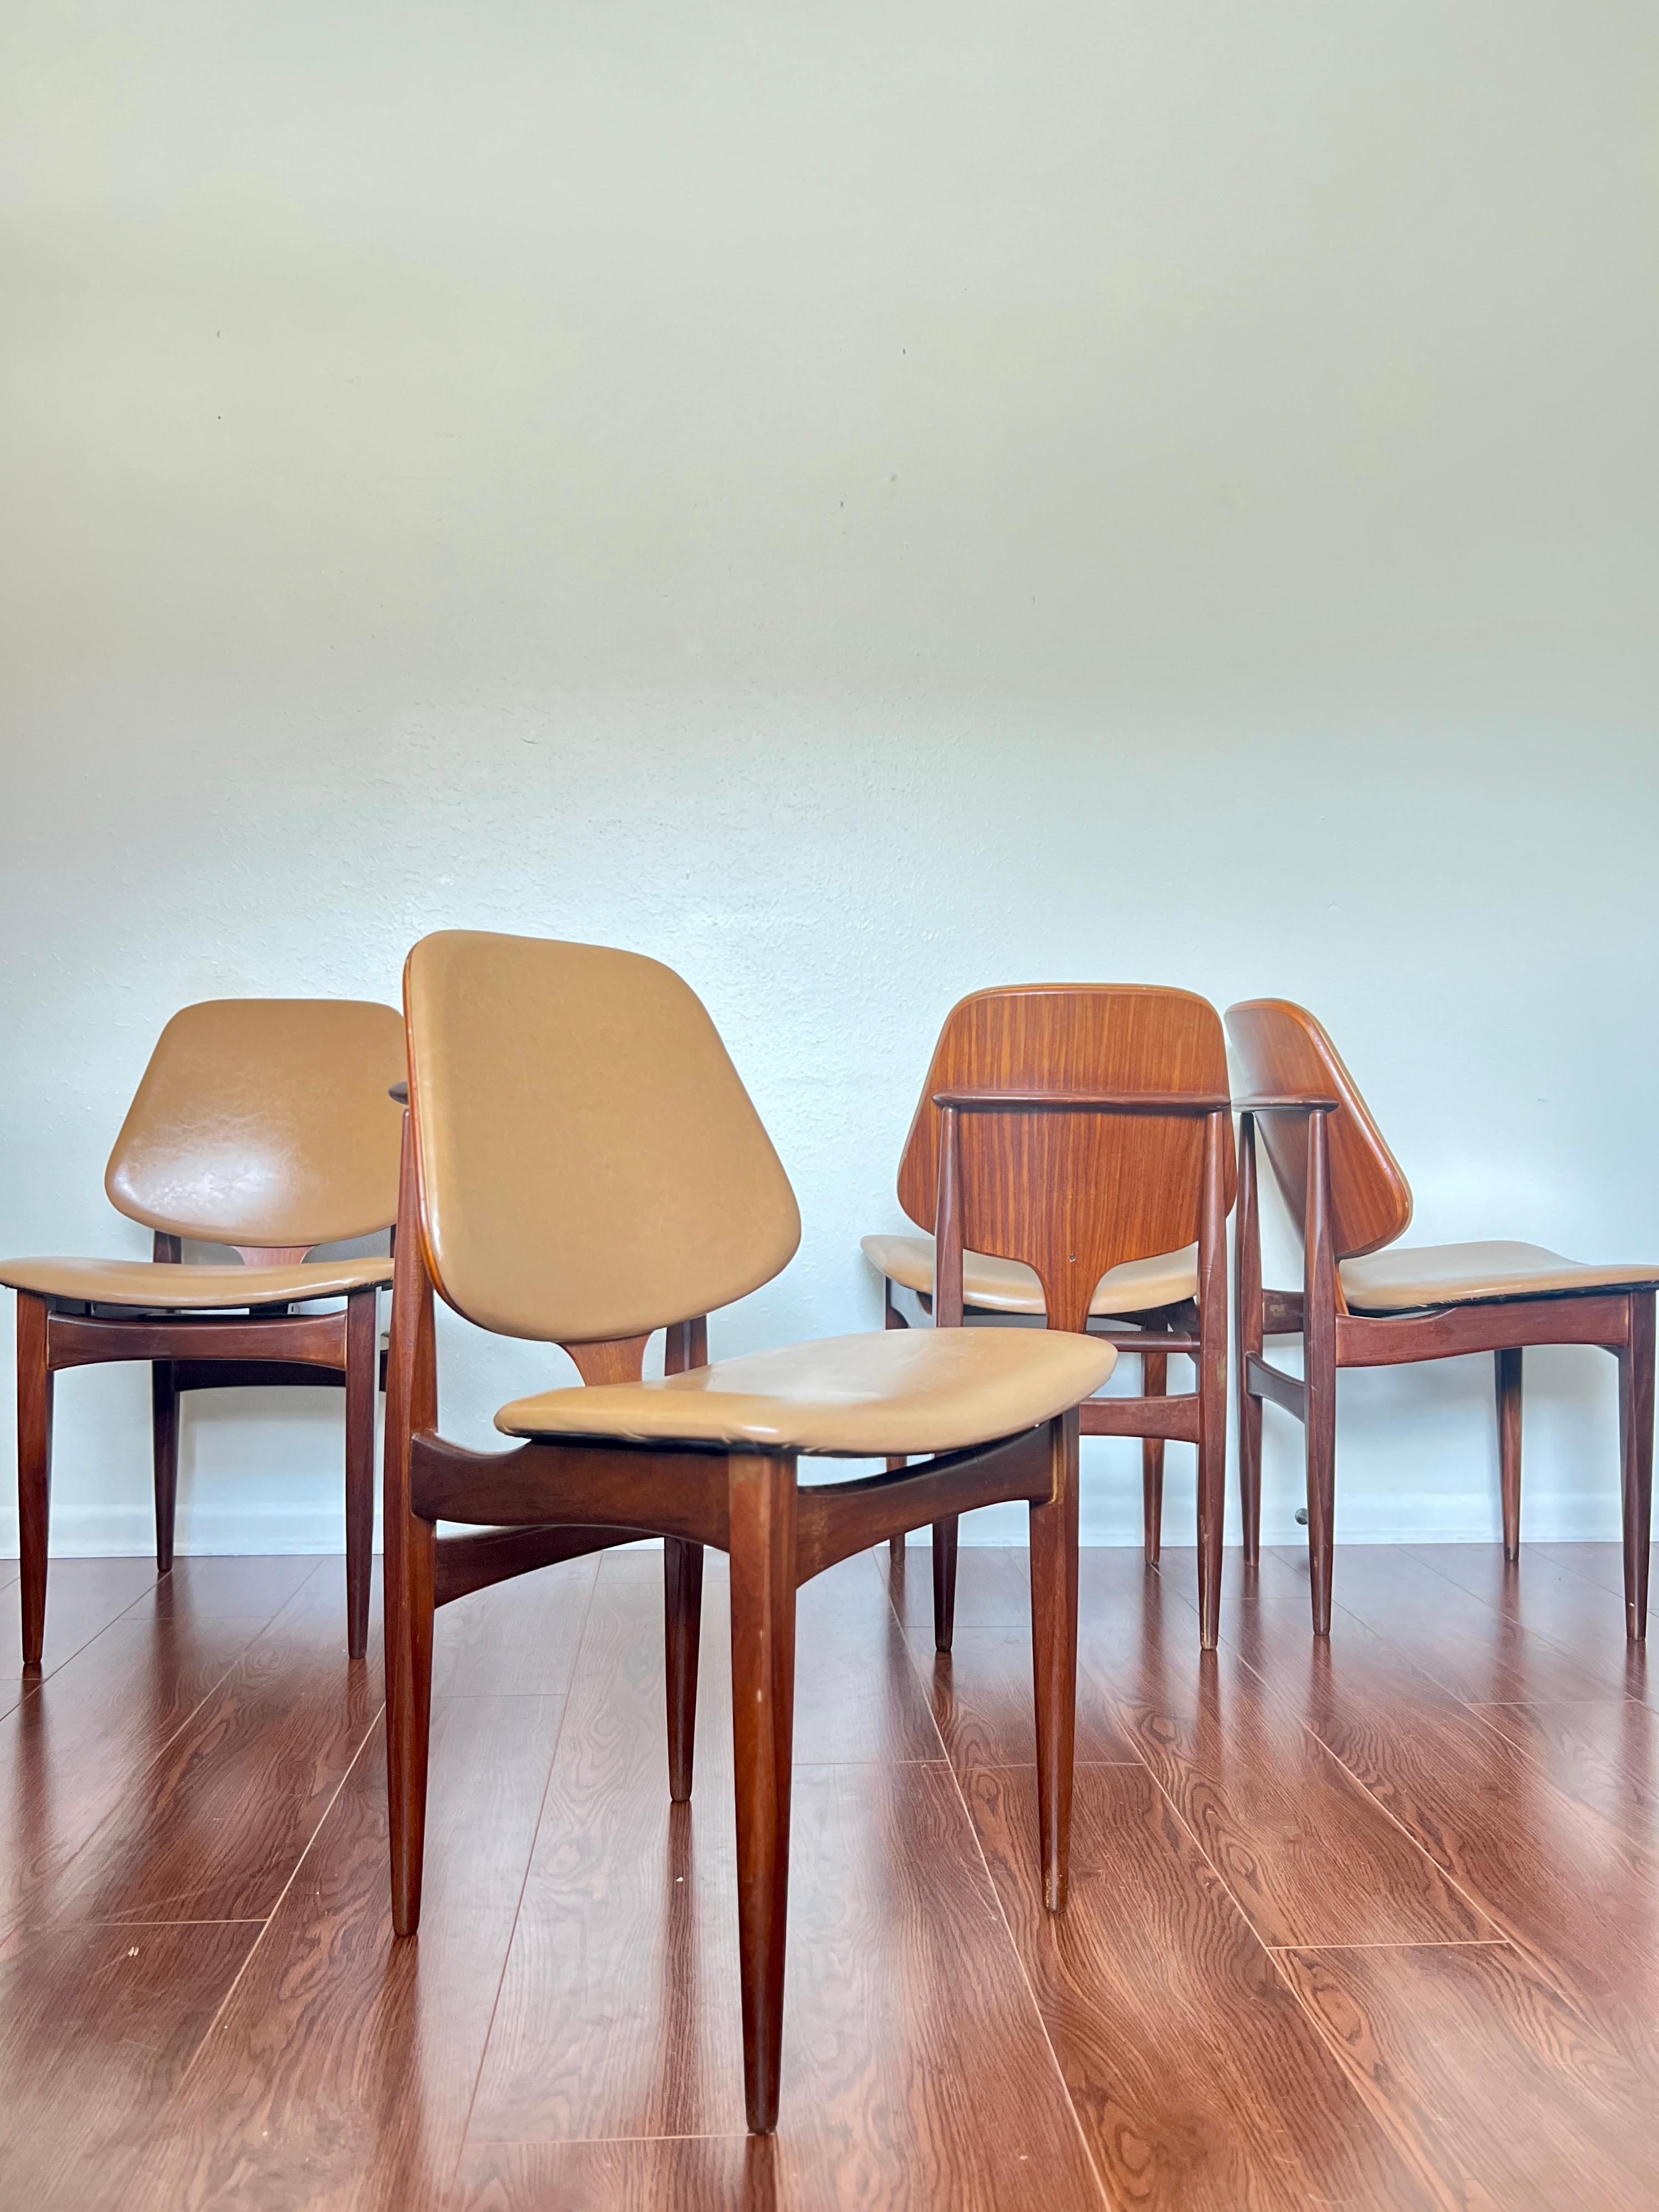 A set of 4 mid century modern dining chairs by Elliots of Newbury 1